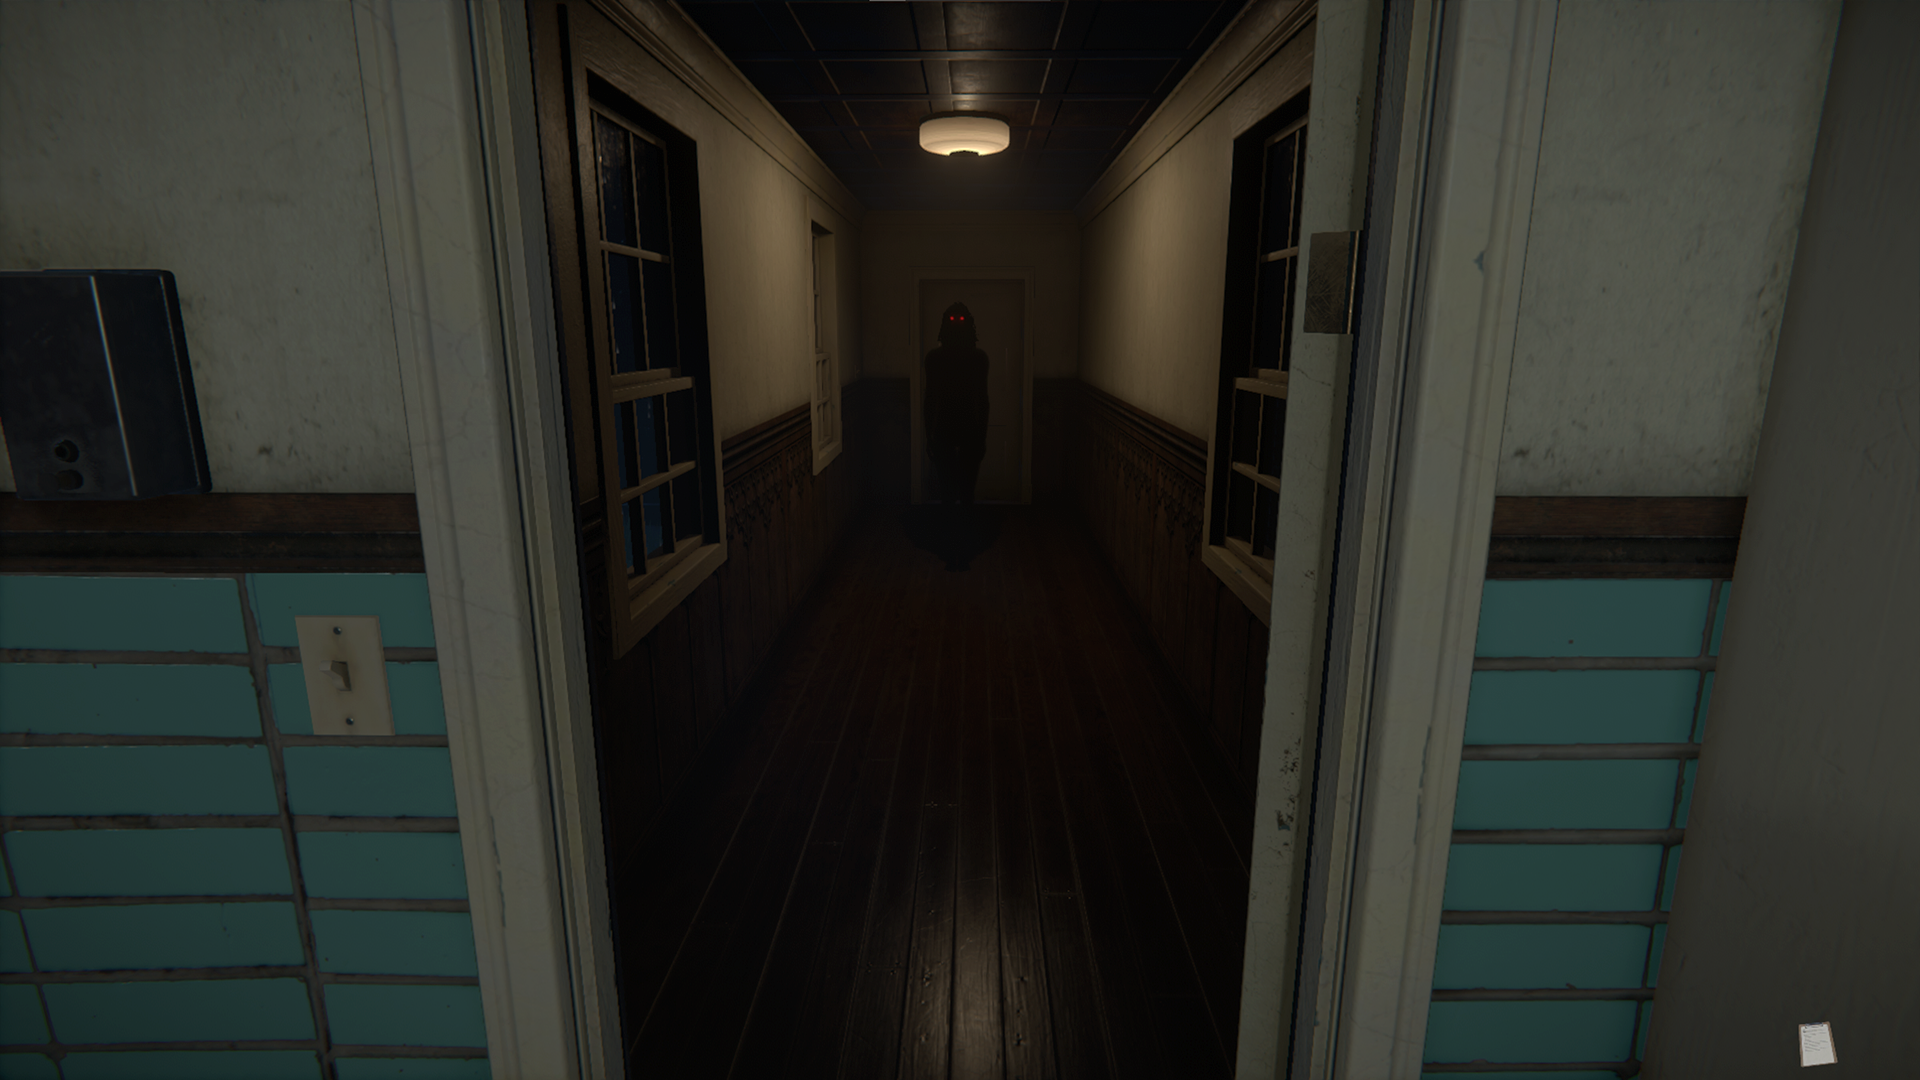 The Mortuary Assistant 1 - A ruby-eyed silhouette ominously stands at the end of the hall.